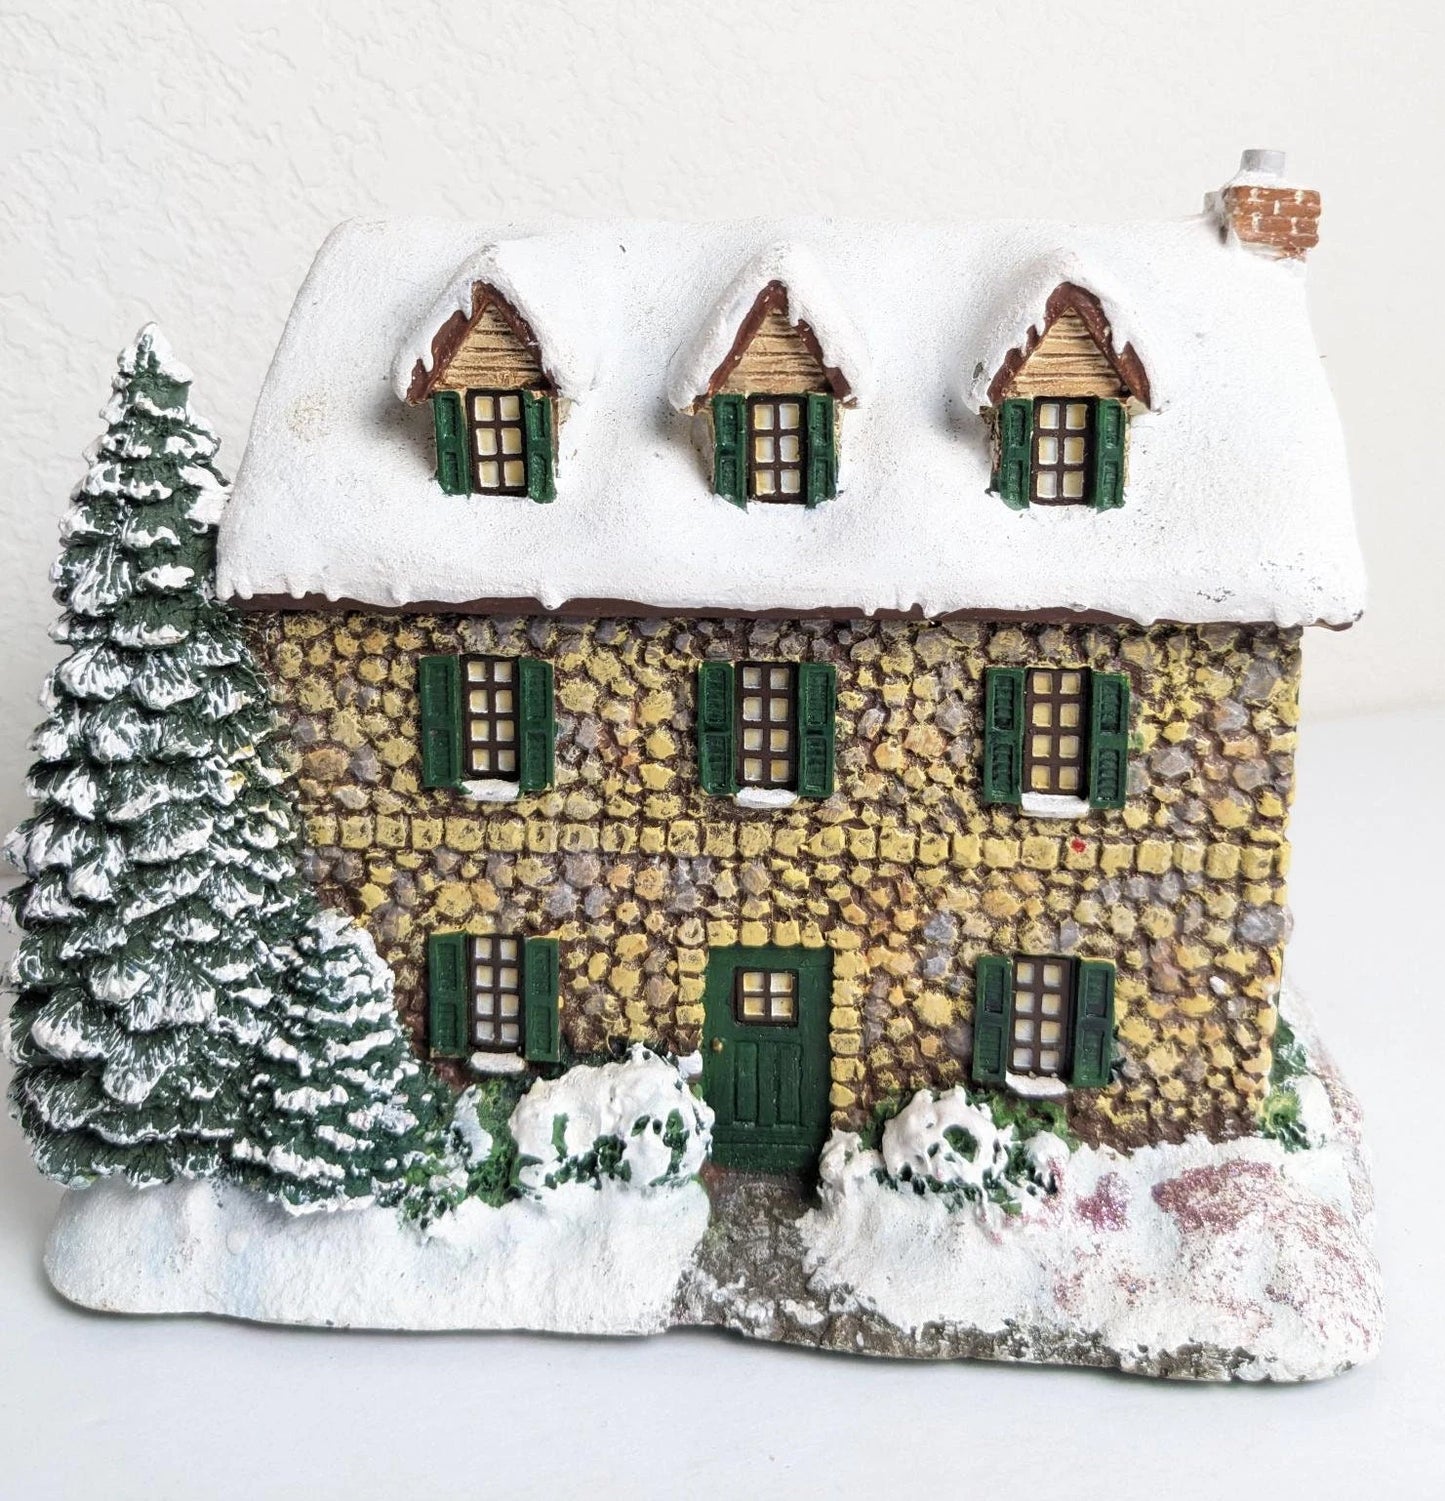 Thomas Kinkade "From the Heart Gifts" Christmas Village Shop